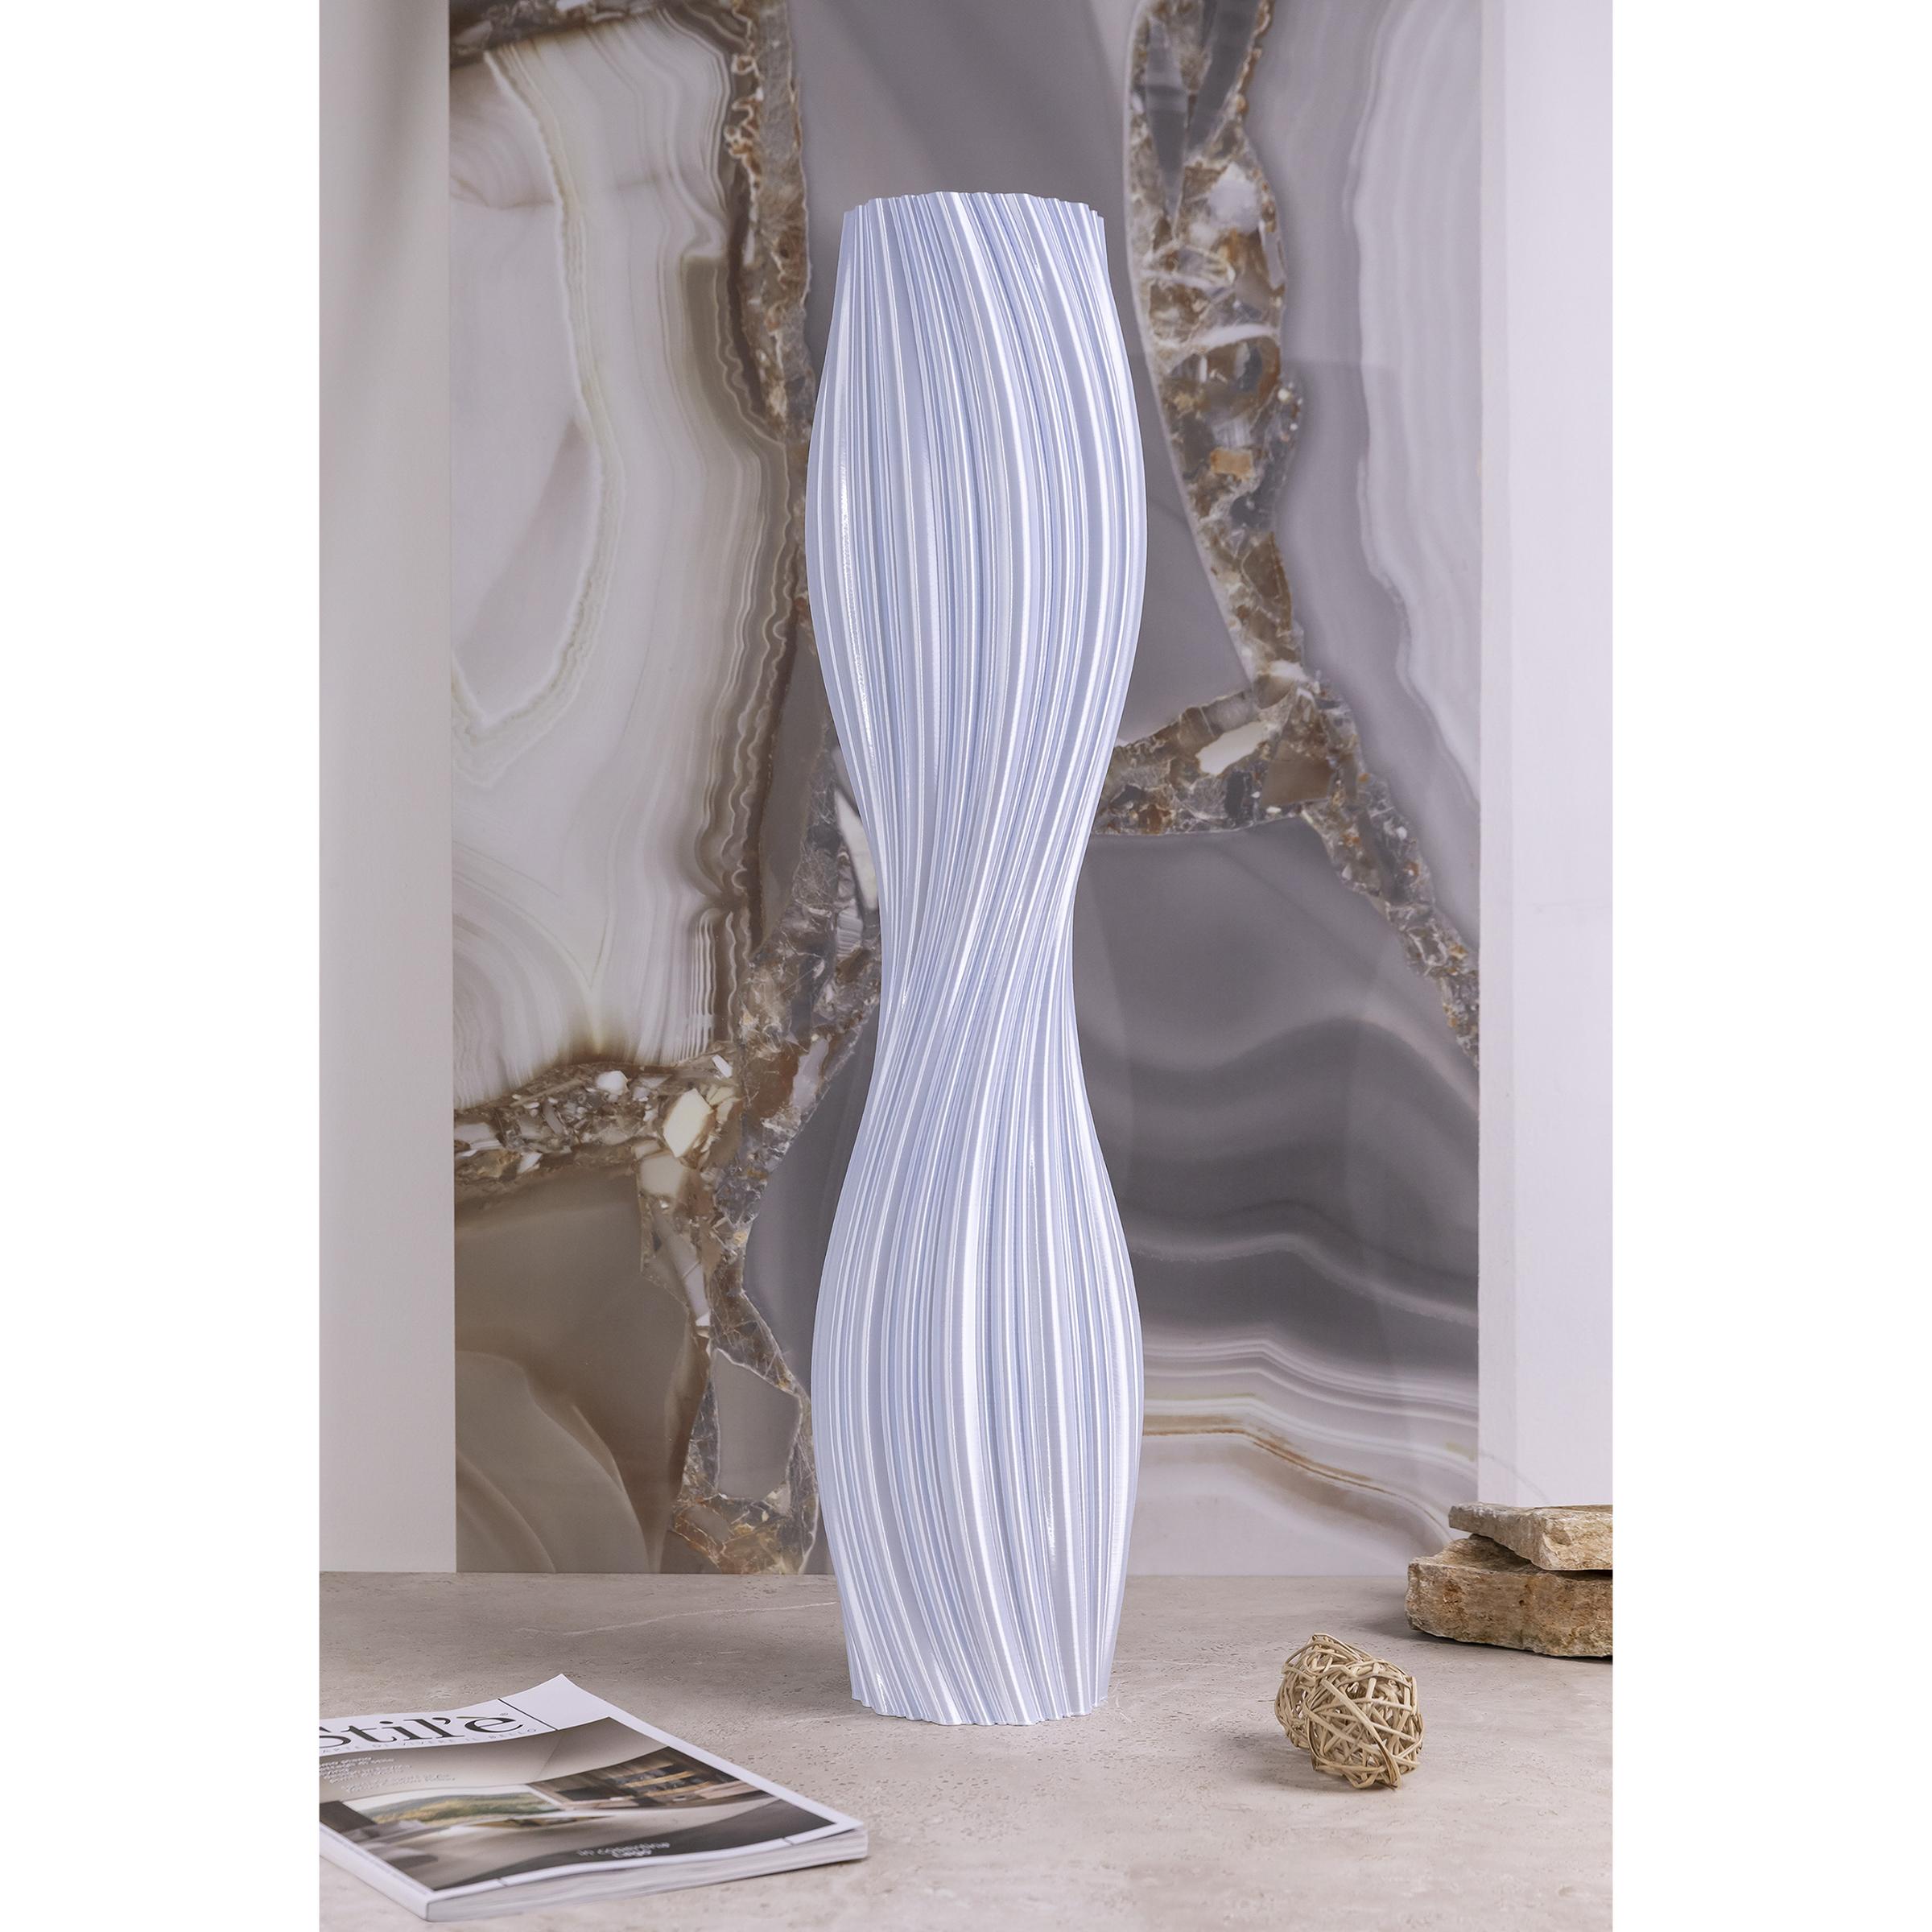 Vase-sculpture by DygoDesign.

A singular design vase; this sculpture embodies soft and soothing lines symmetrically merging in a vertical sinuous silhouette. Exuding a pleasant sense of harmony, it is dynamic and peaceful at the same time.